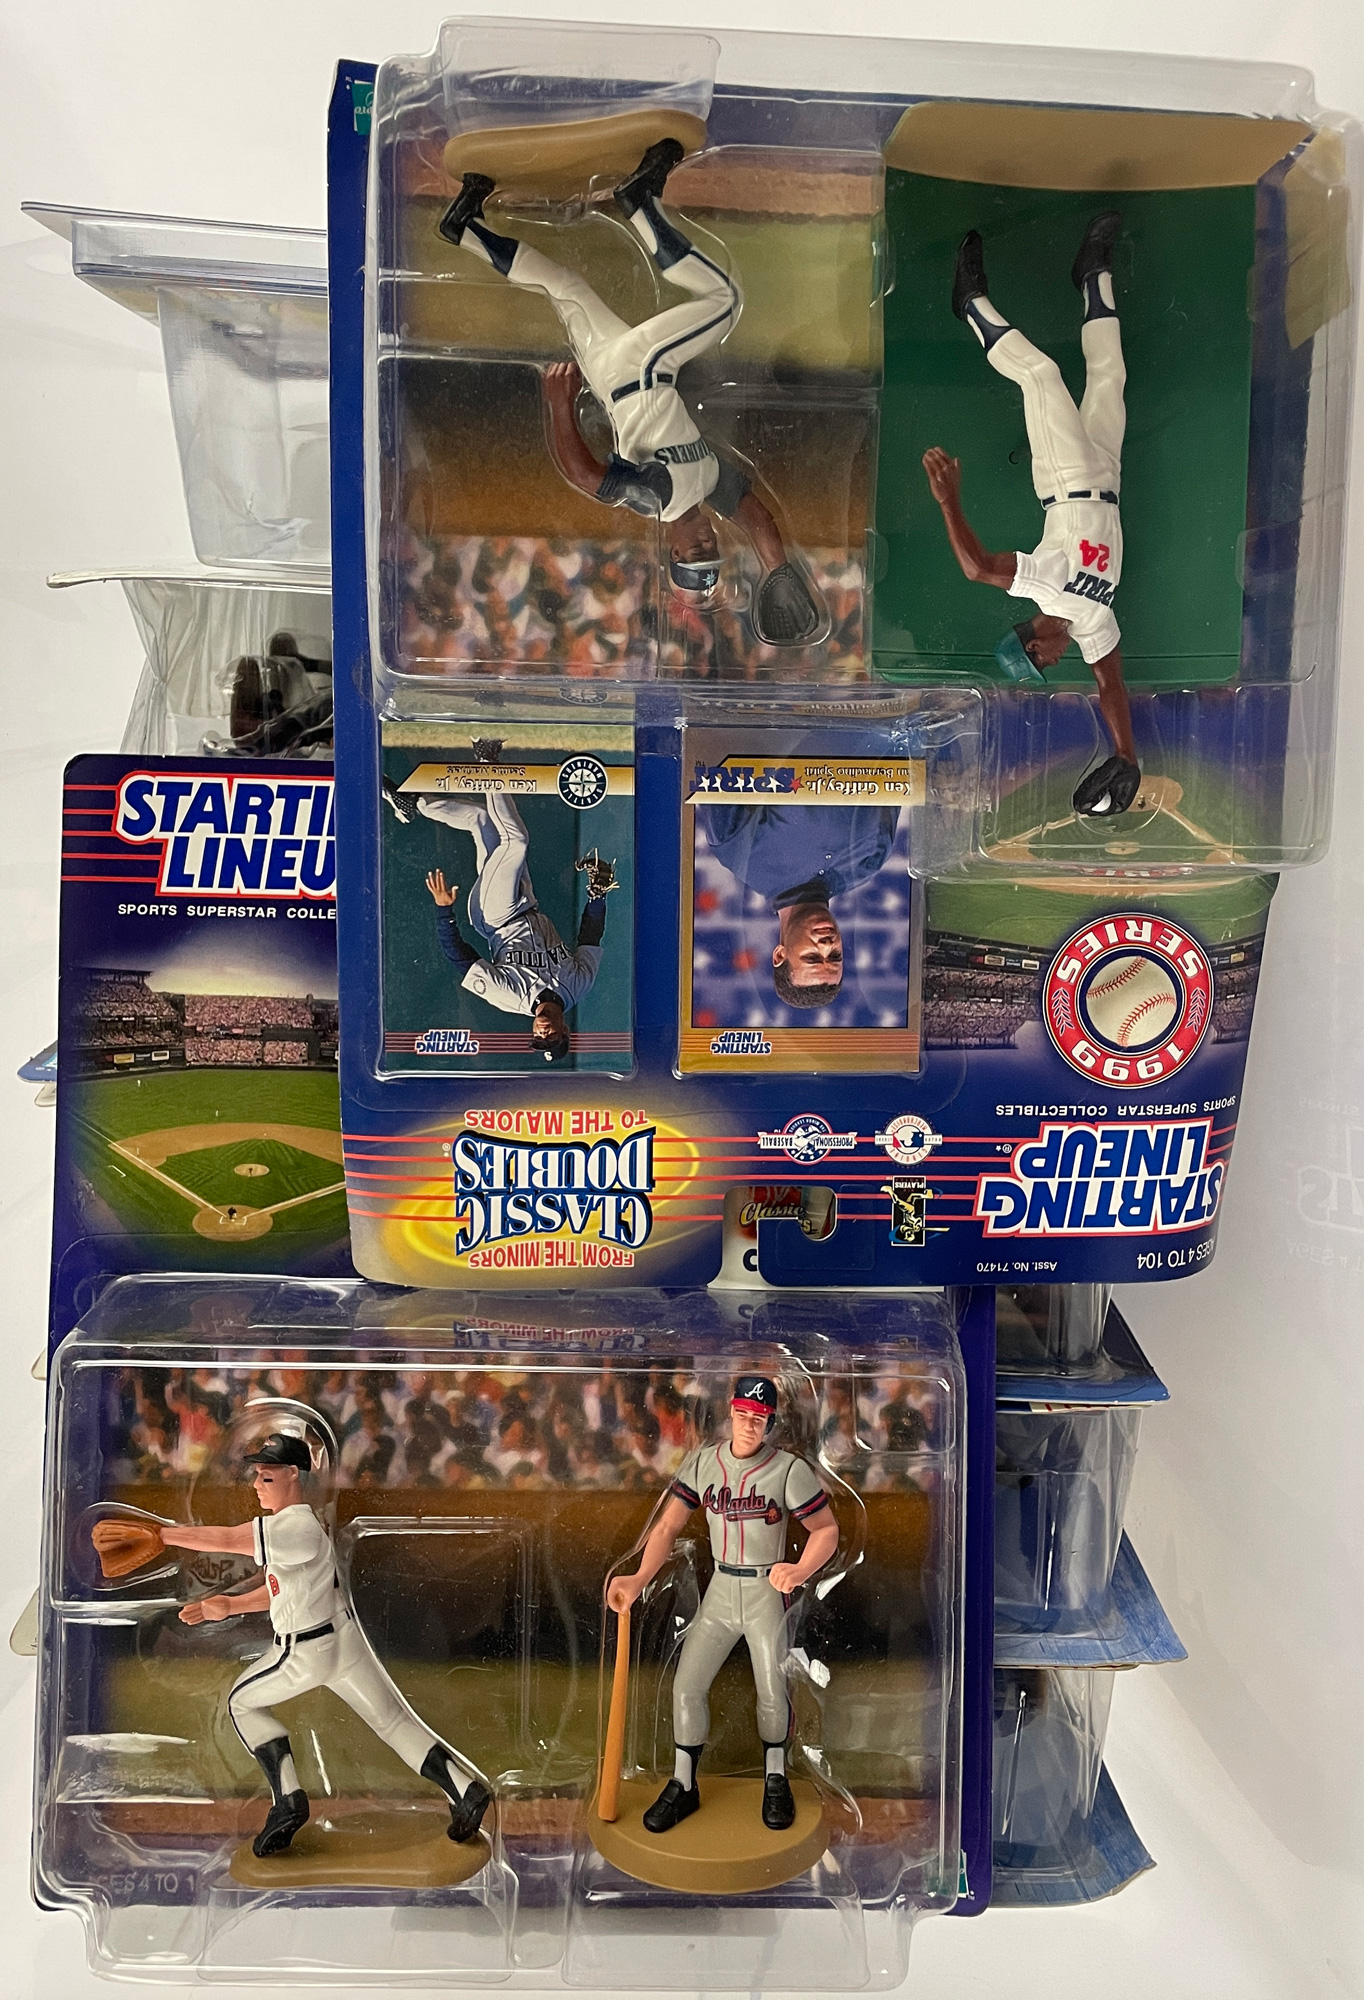 Babe+Ruth+MLB+Cooperstown+Collection+Starting+Lineup+Figure+12%22+